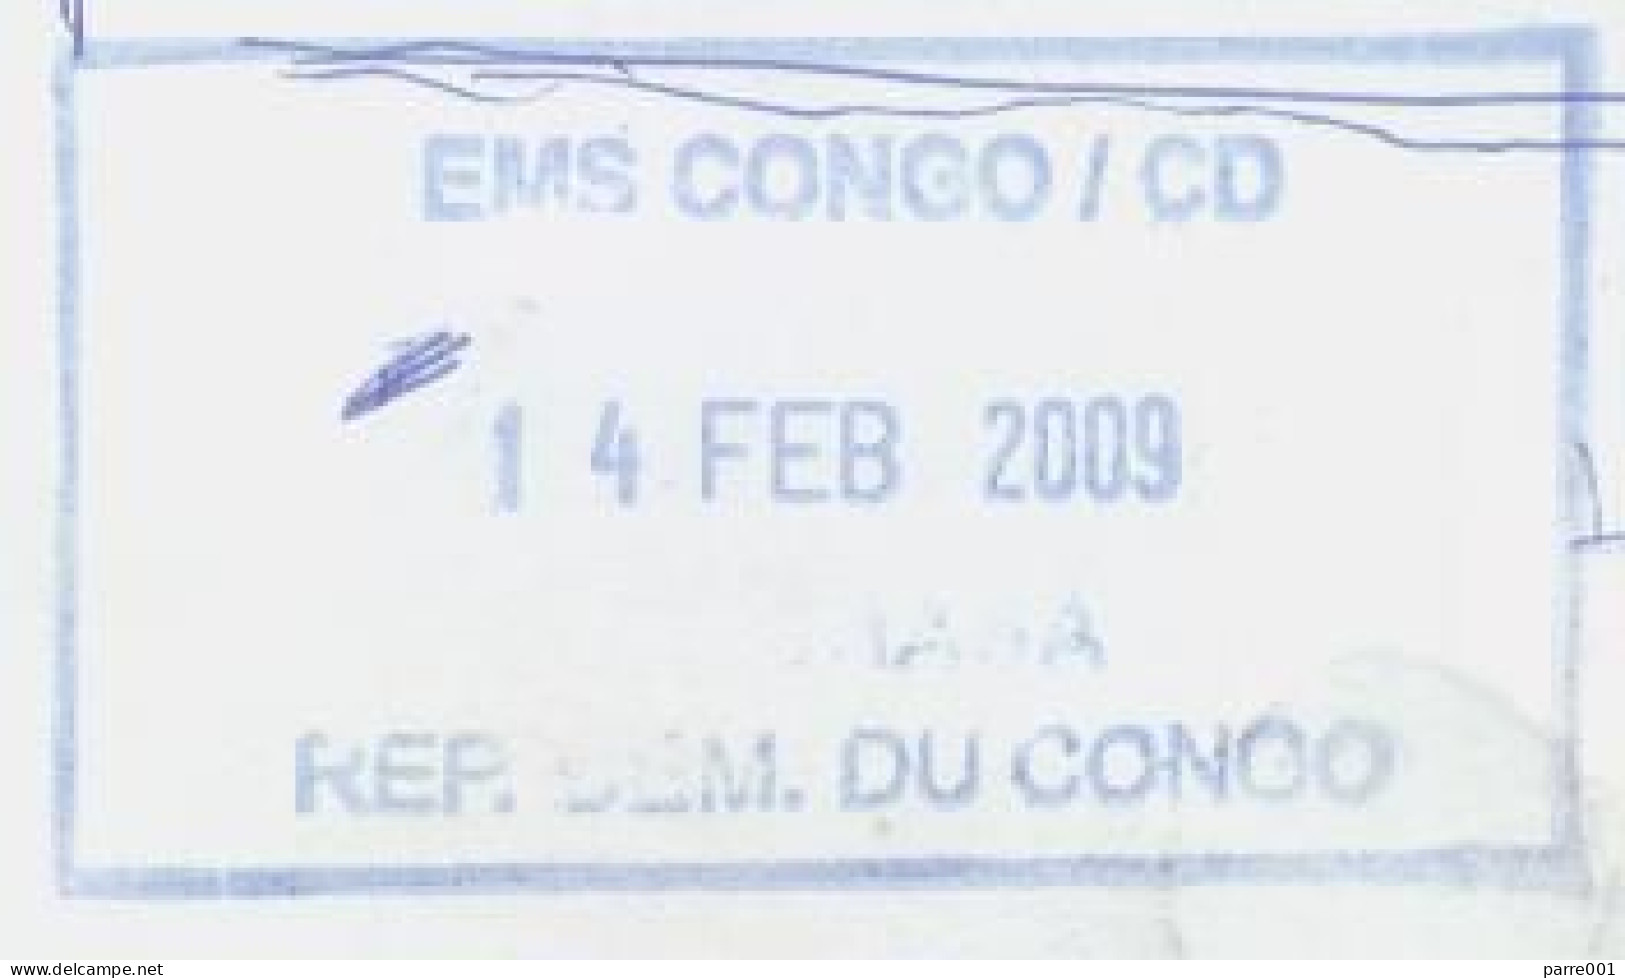 DRC Congo 2009 Beni EMS Label Kinshasa Via Goma With CAA Airline Includes Lead Sealing Weight. Rare - Brieven